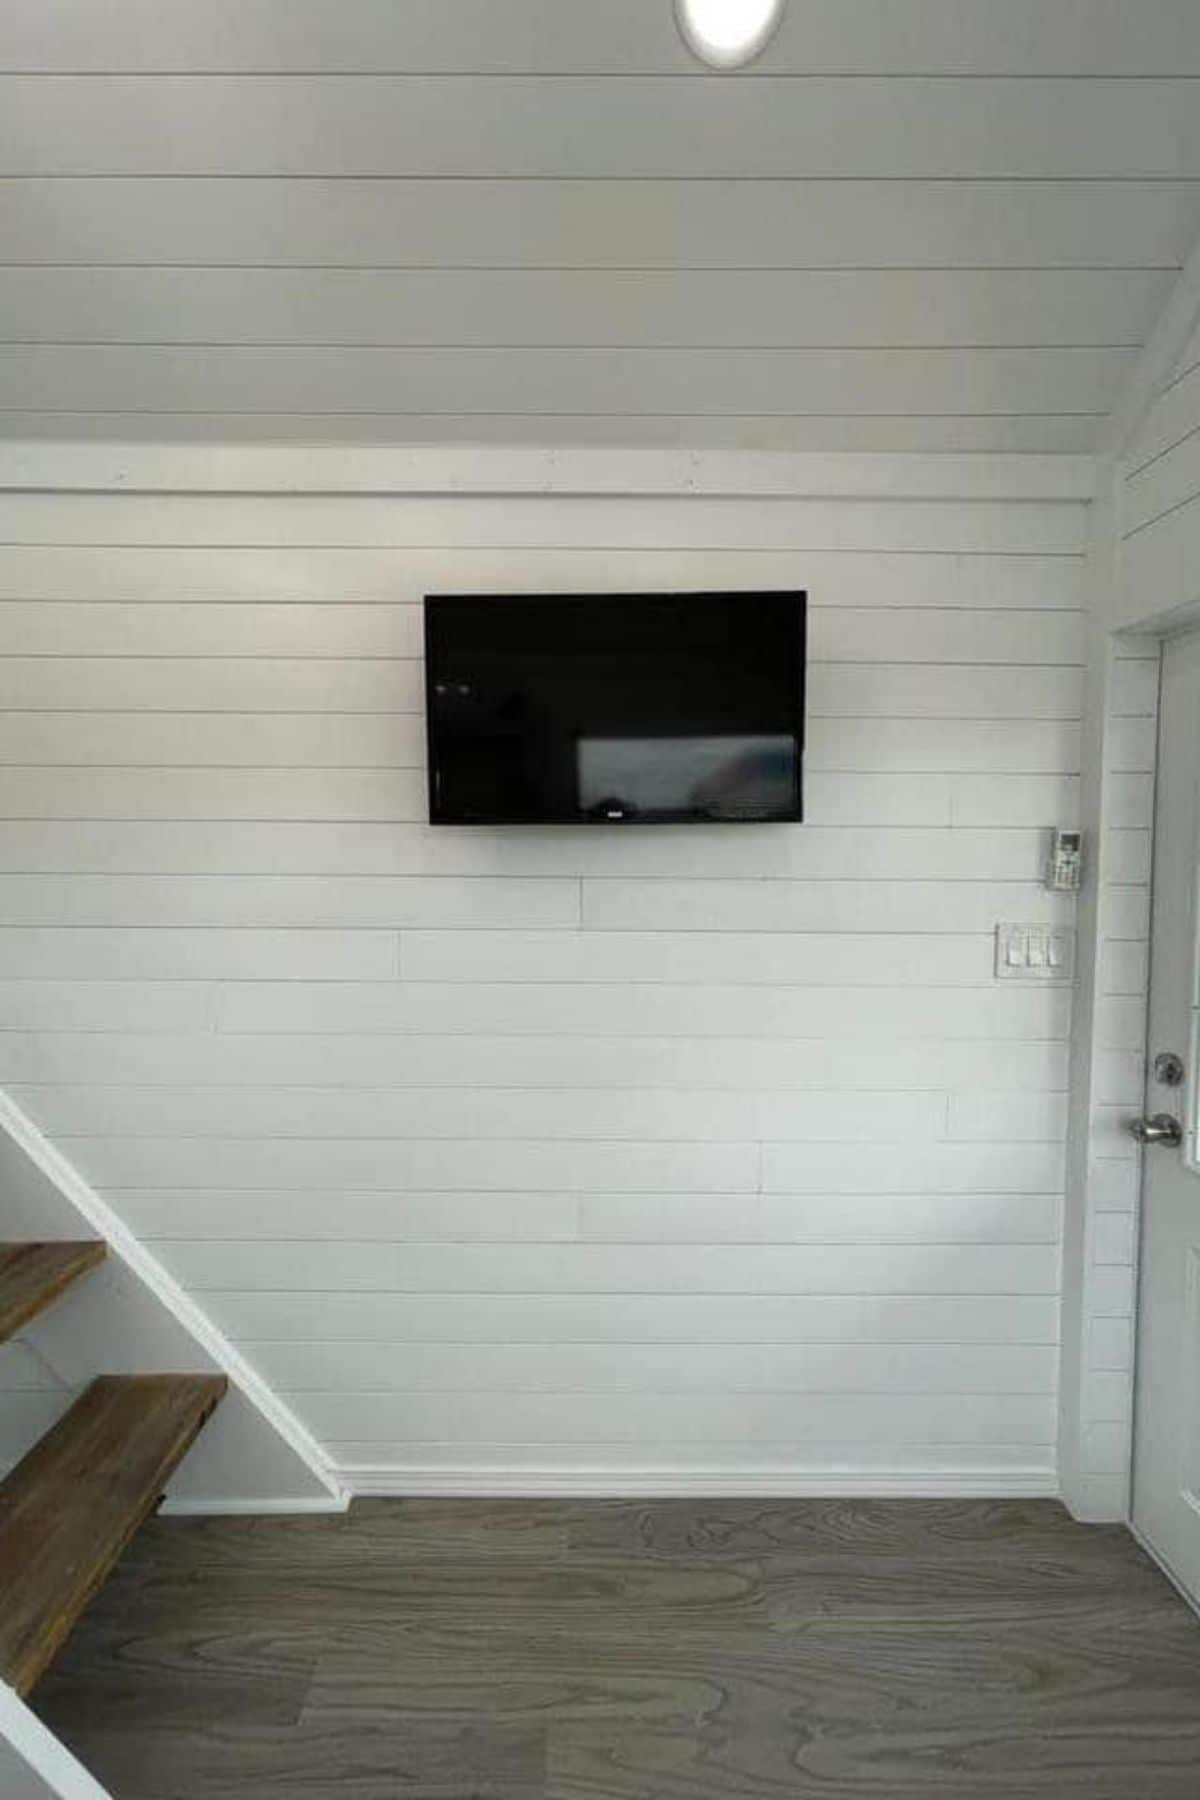 TV mountain on white shiplap wall by stairs to loft